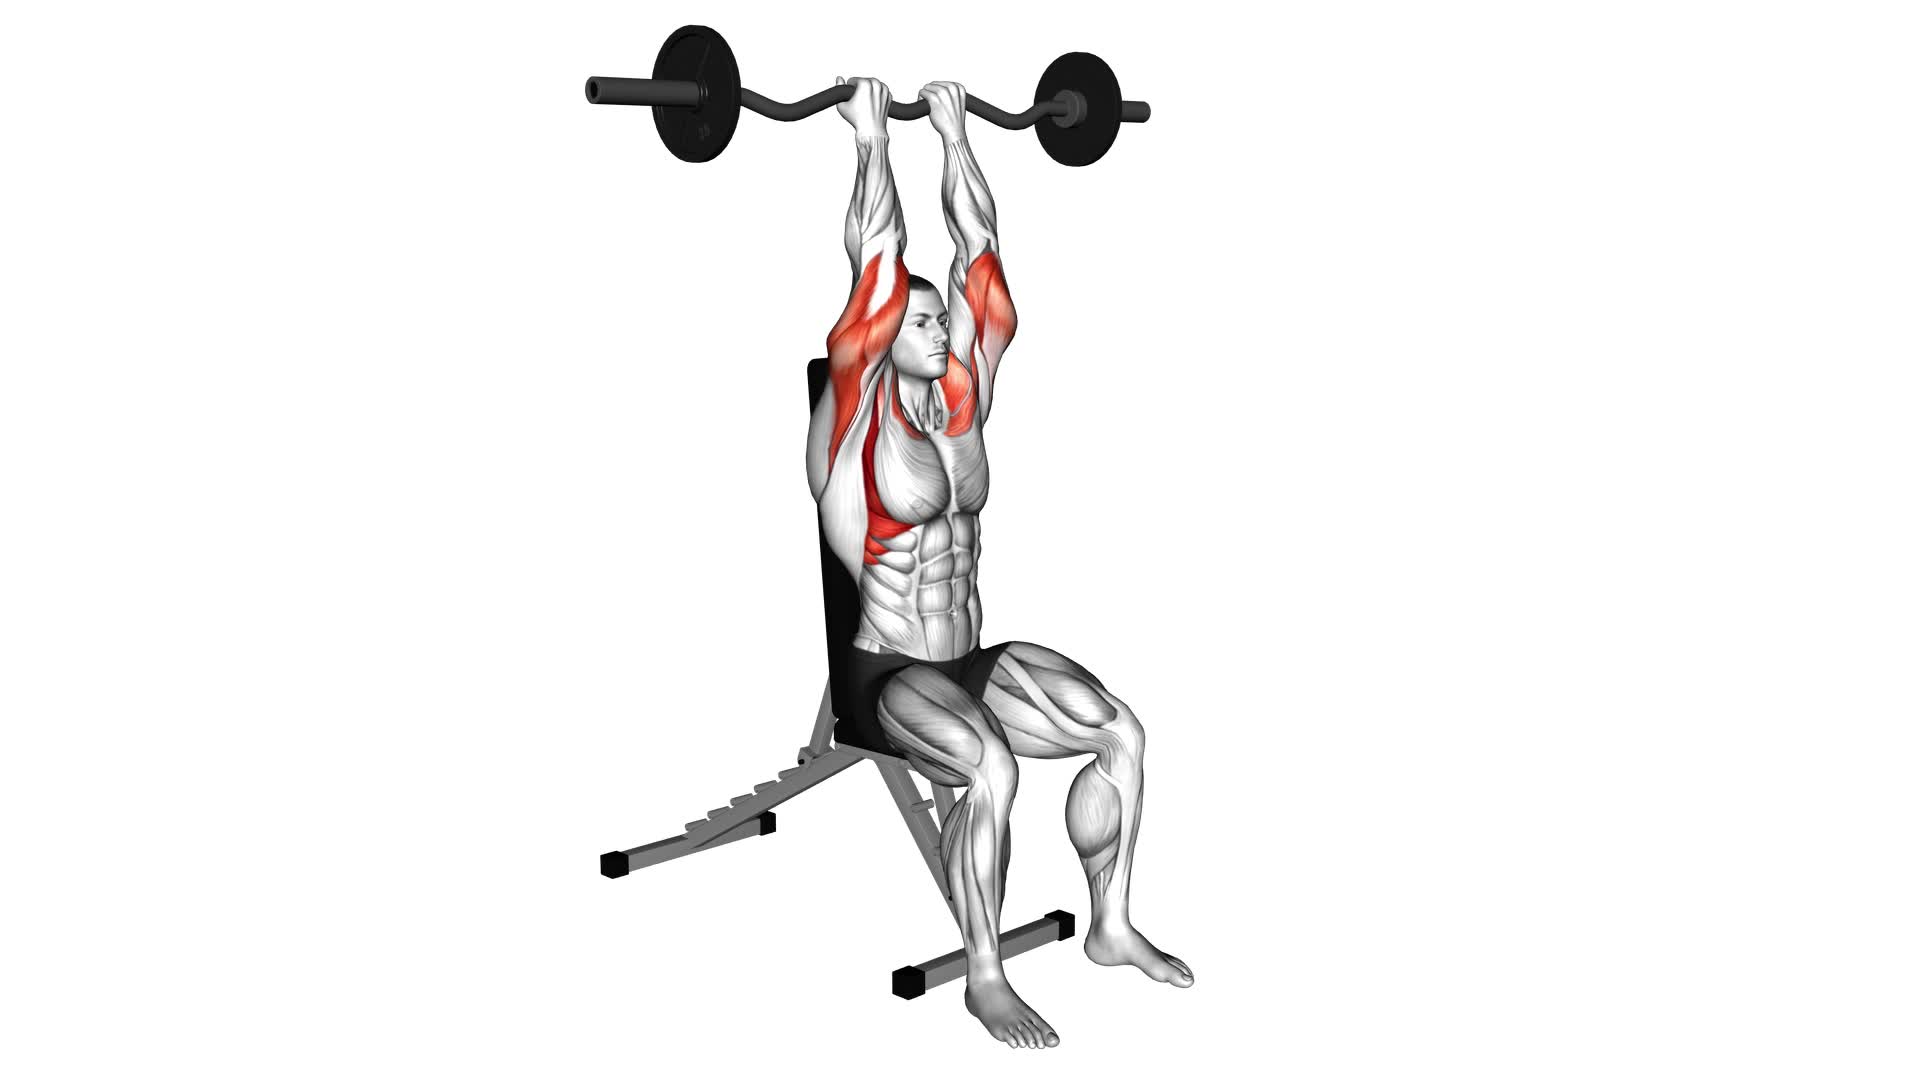 EZ Bar Seated Close Grip Shoulder Press - Video Exercise Guide & Tips